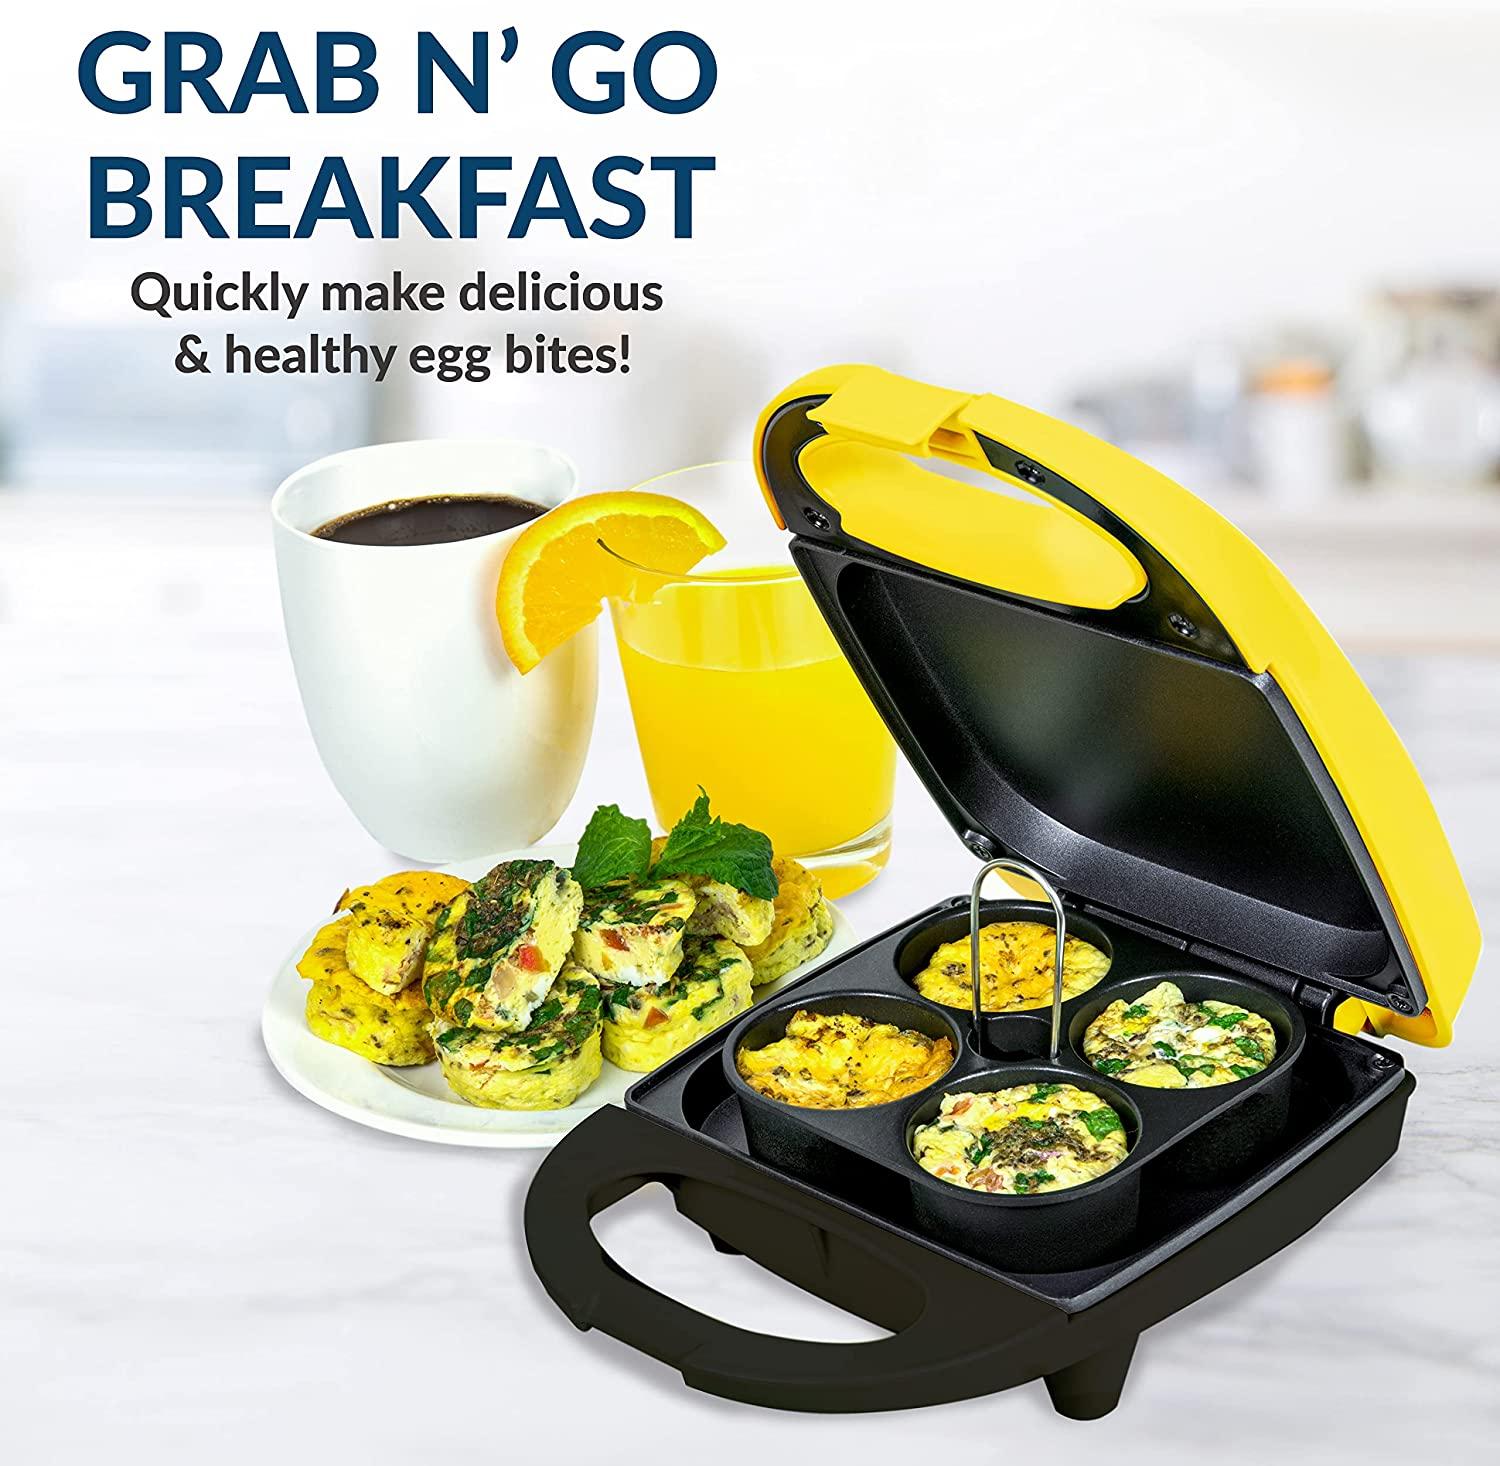 Nostalgia MyMini Personal Breakfast Bites, Perfect for Eggs, Omelets  Muffins, Sandwiches, Desserts, Keto, Healthy Snack Size & Paleo, Portion  Control Cook 4 Mini Pieces at A Time, Yellow Egg Bite Maker